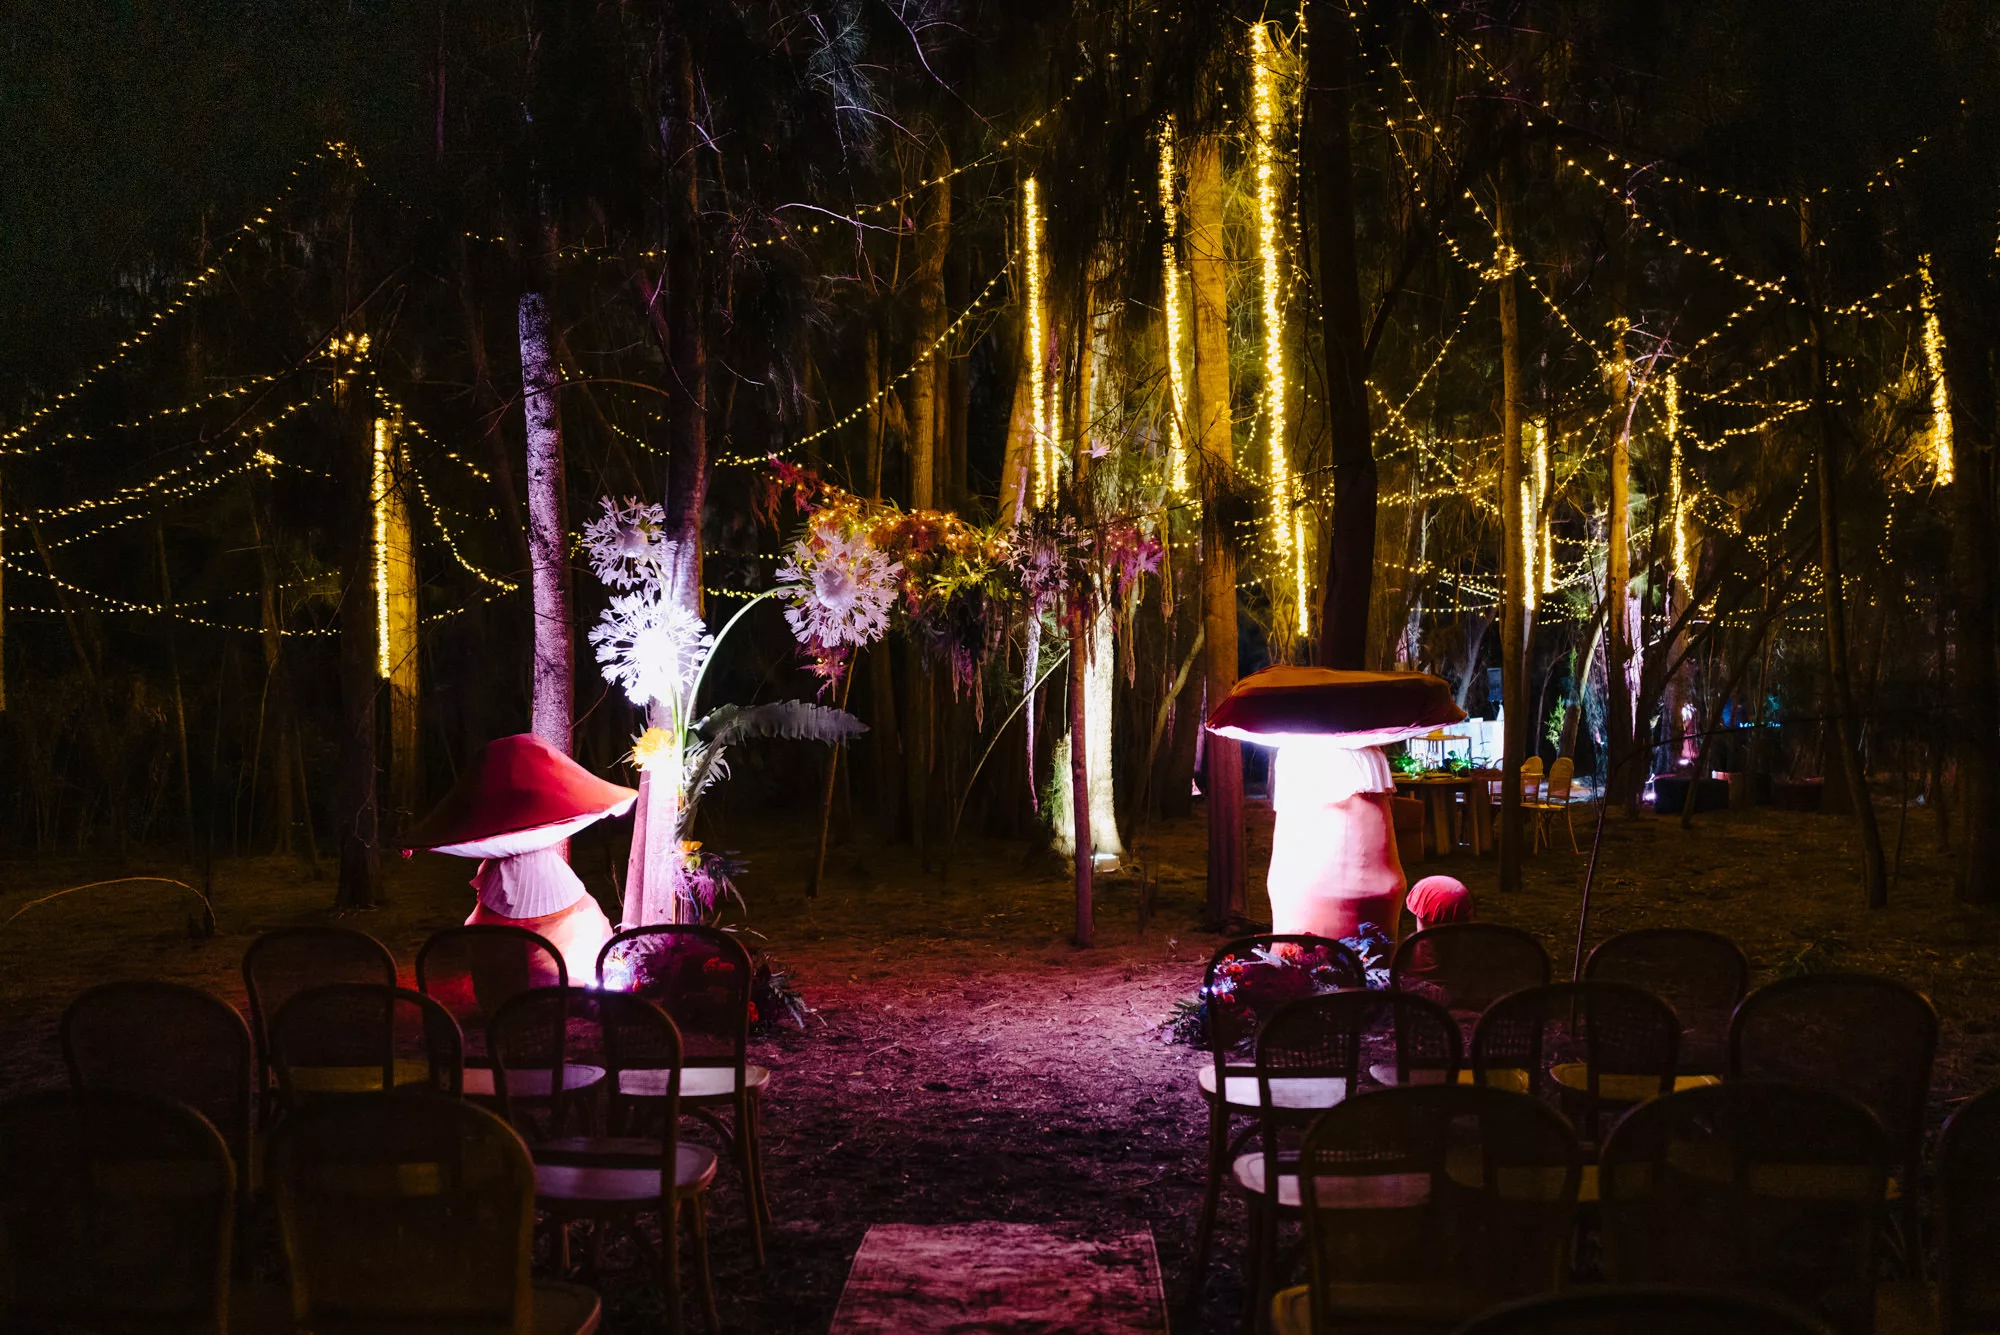 Evening Forest Wedding Ceremony with Tree Uplighting Ideas | Tampa Bay Event Venue Royal Pines Estate